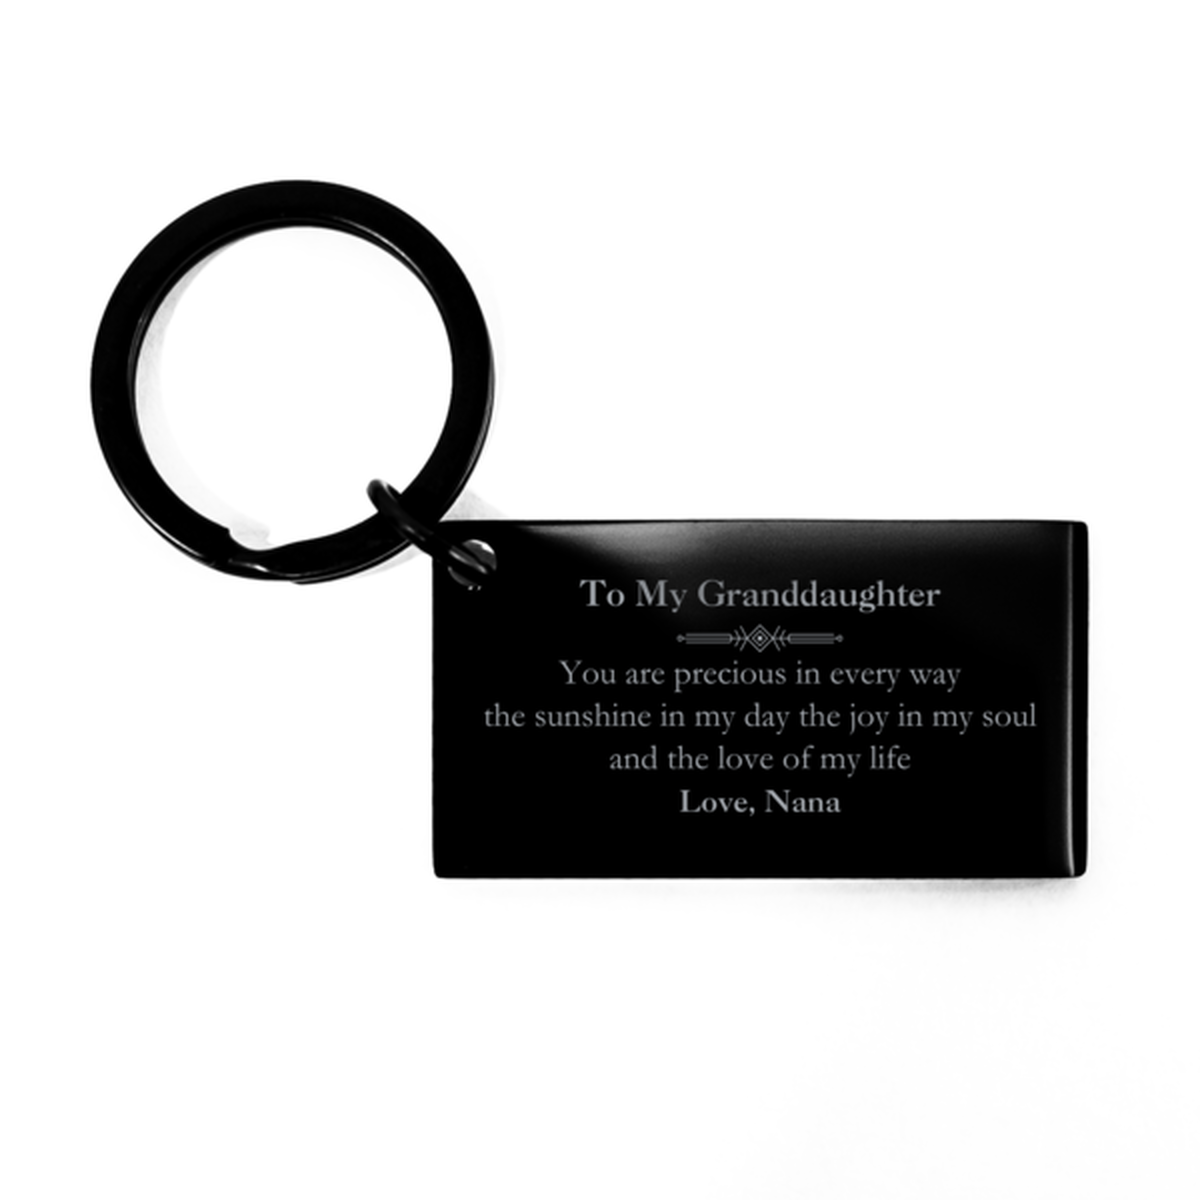 Graduation Gifts for Granddaughter Keychain Present from Nana, Christmas Granddaughter Birthday Gifts Granddaughter You are precious in every way the sunshine in my day. Love, Nana